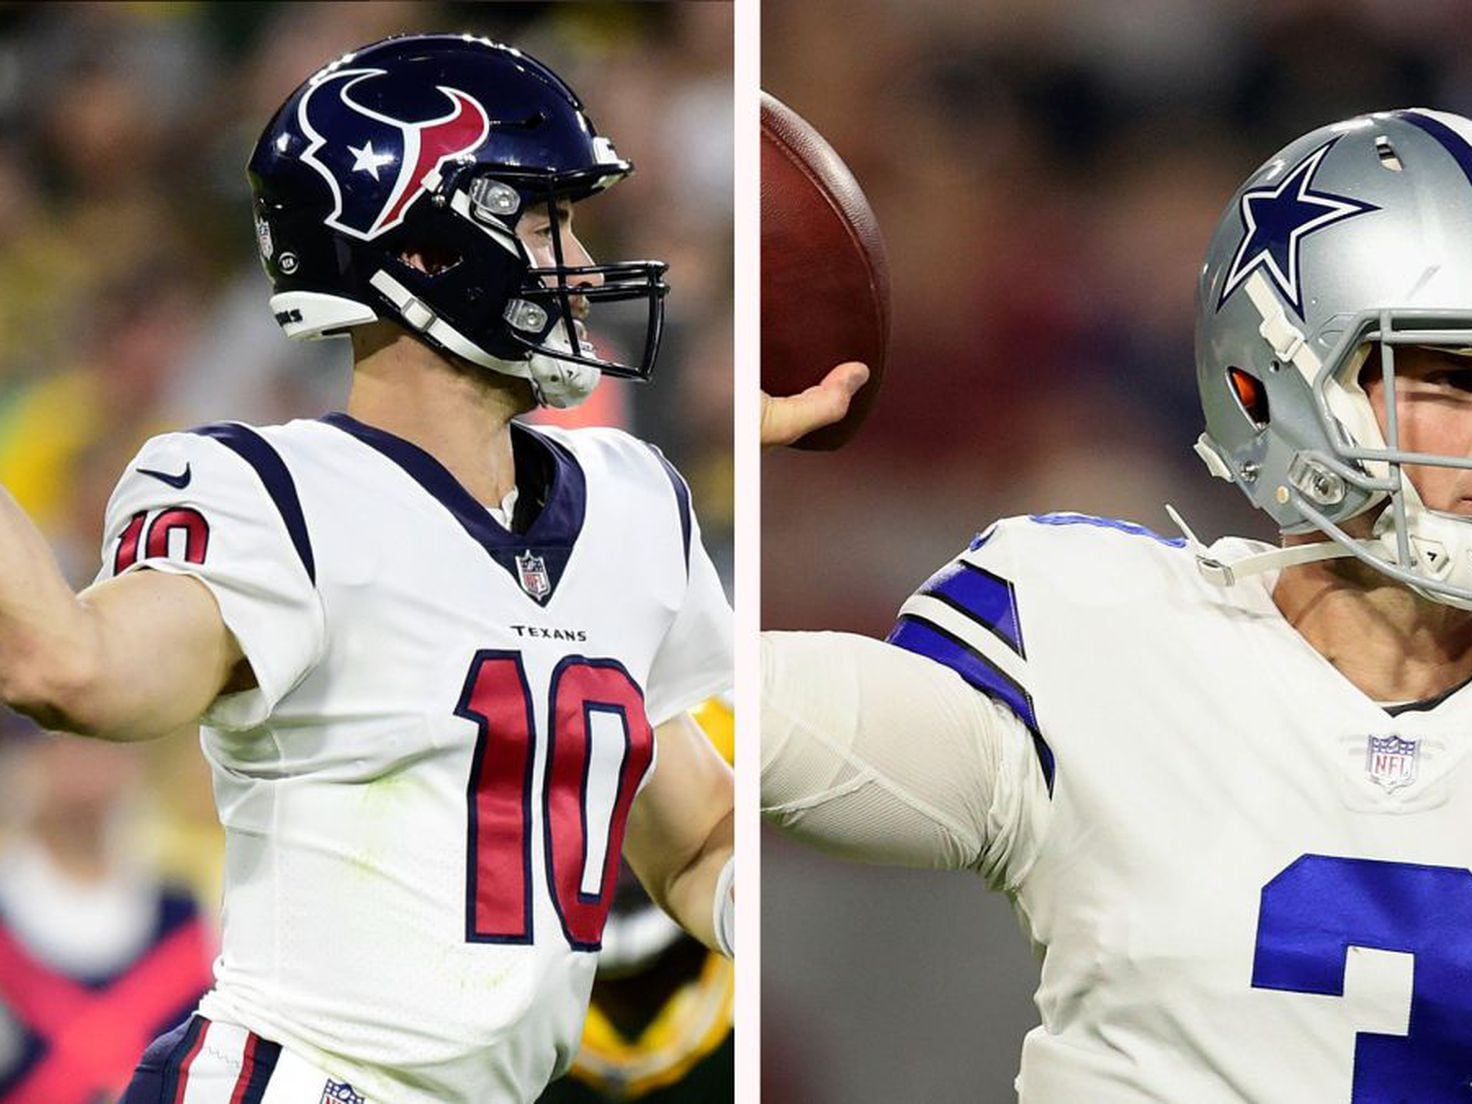 Sunday Night Football: Cowboy vs. Texans game time, live streaming